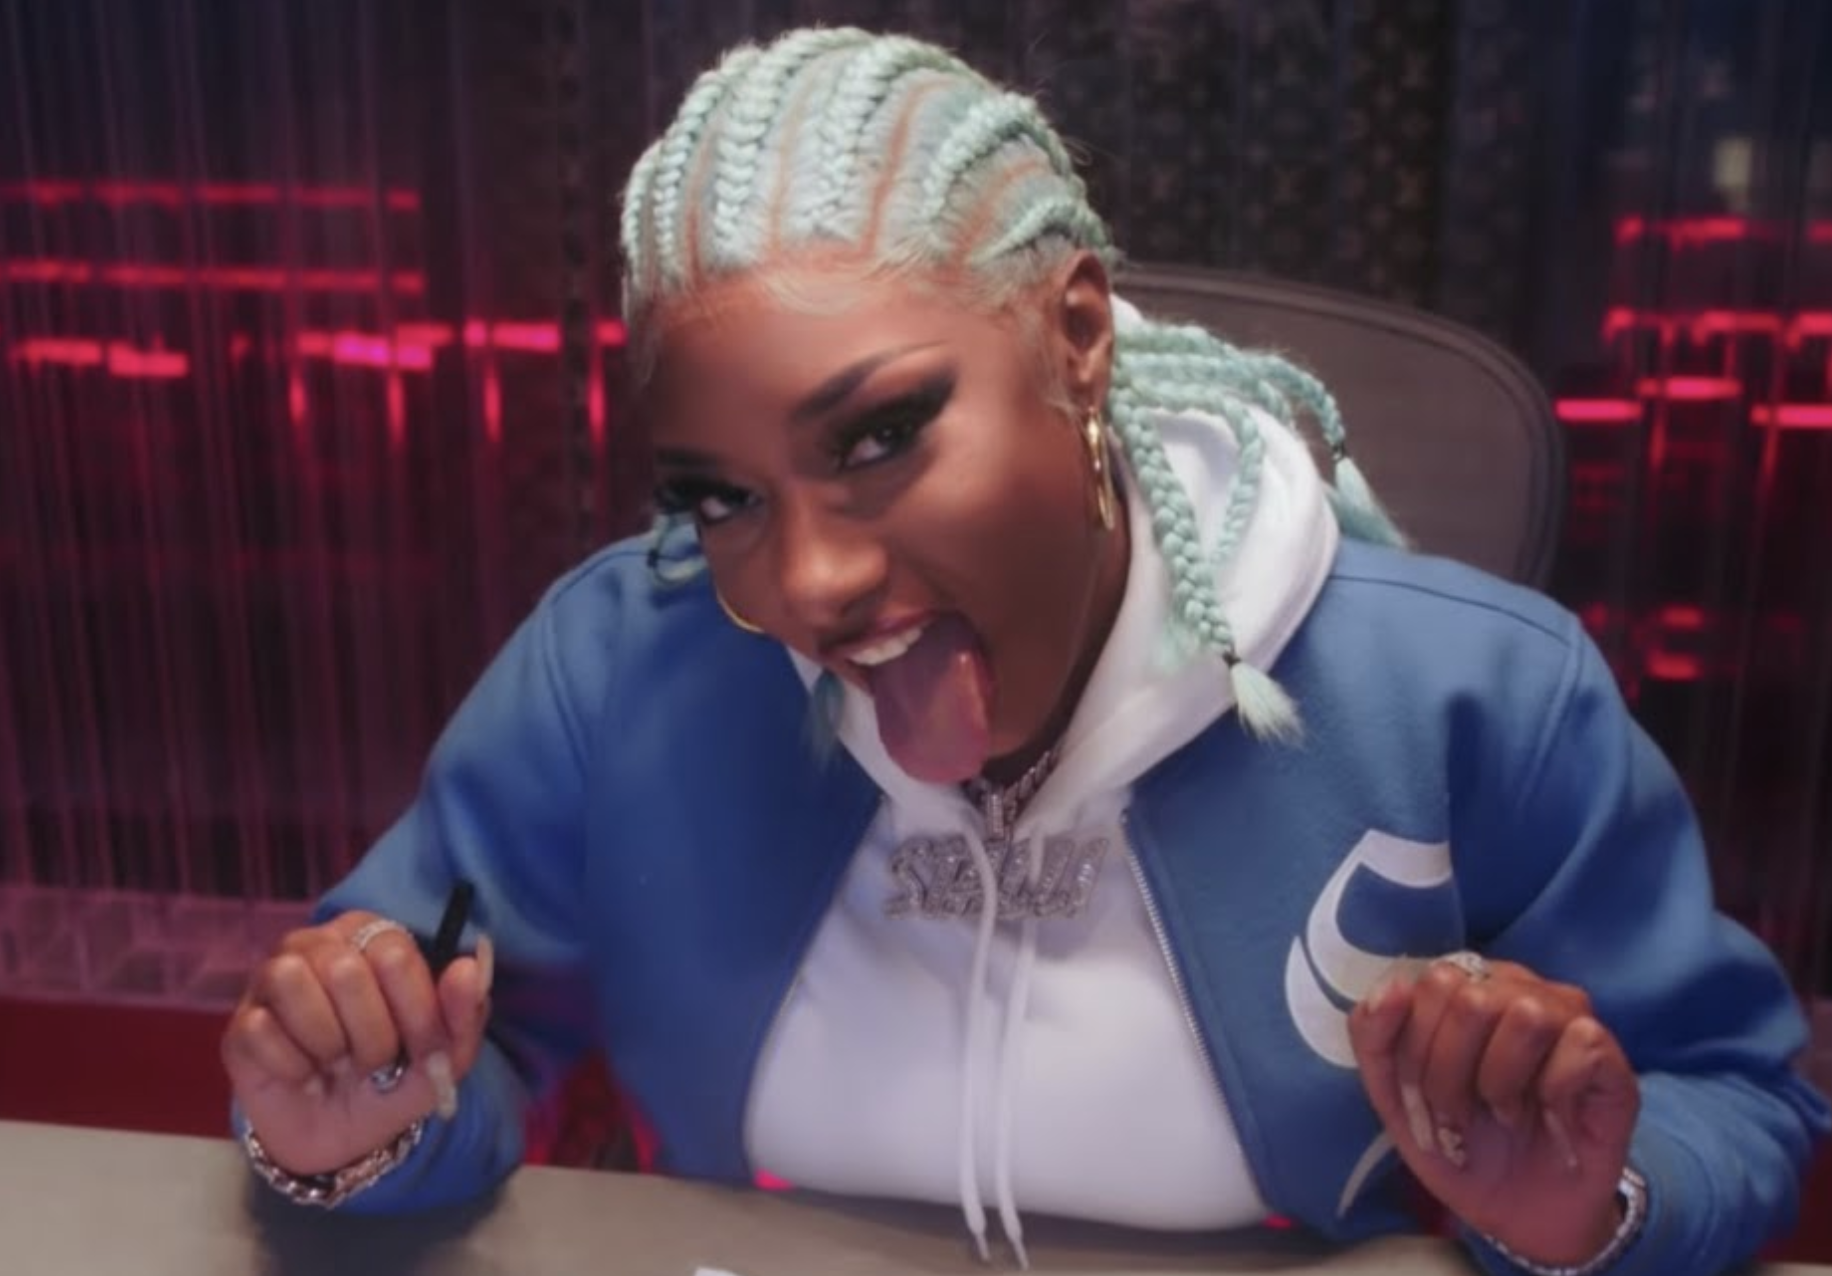 Megan Thee Stallion Turns Up In The Studio In “Captain Hook” [WATCH]